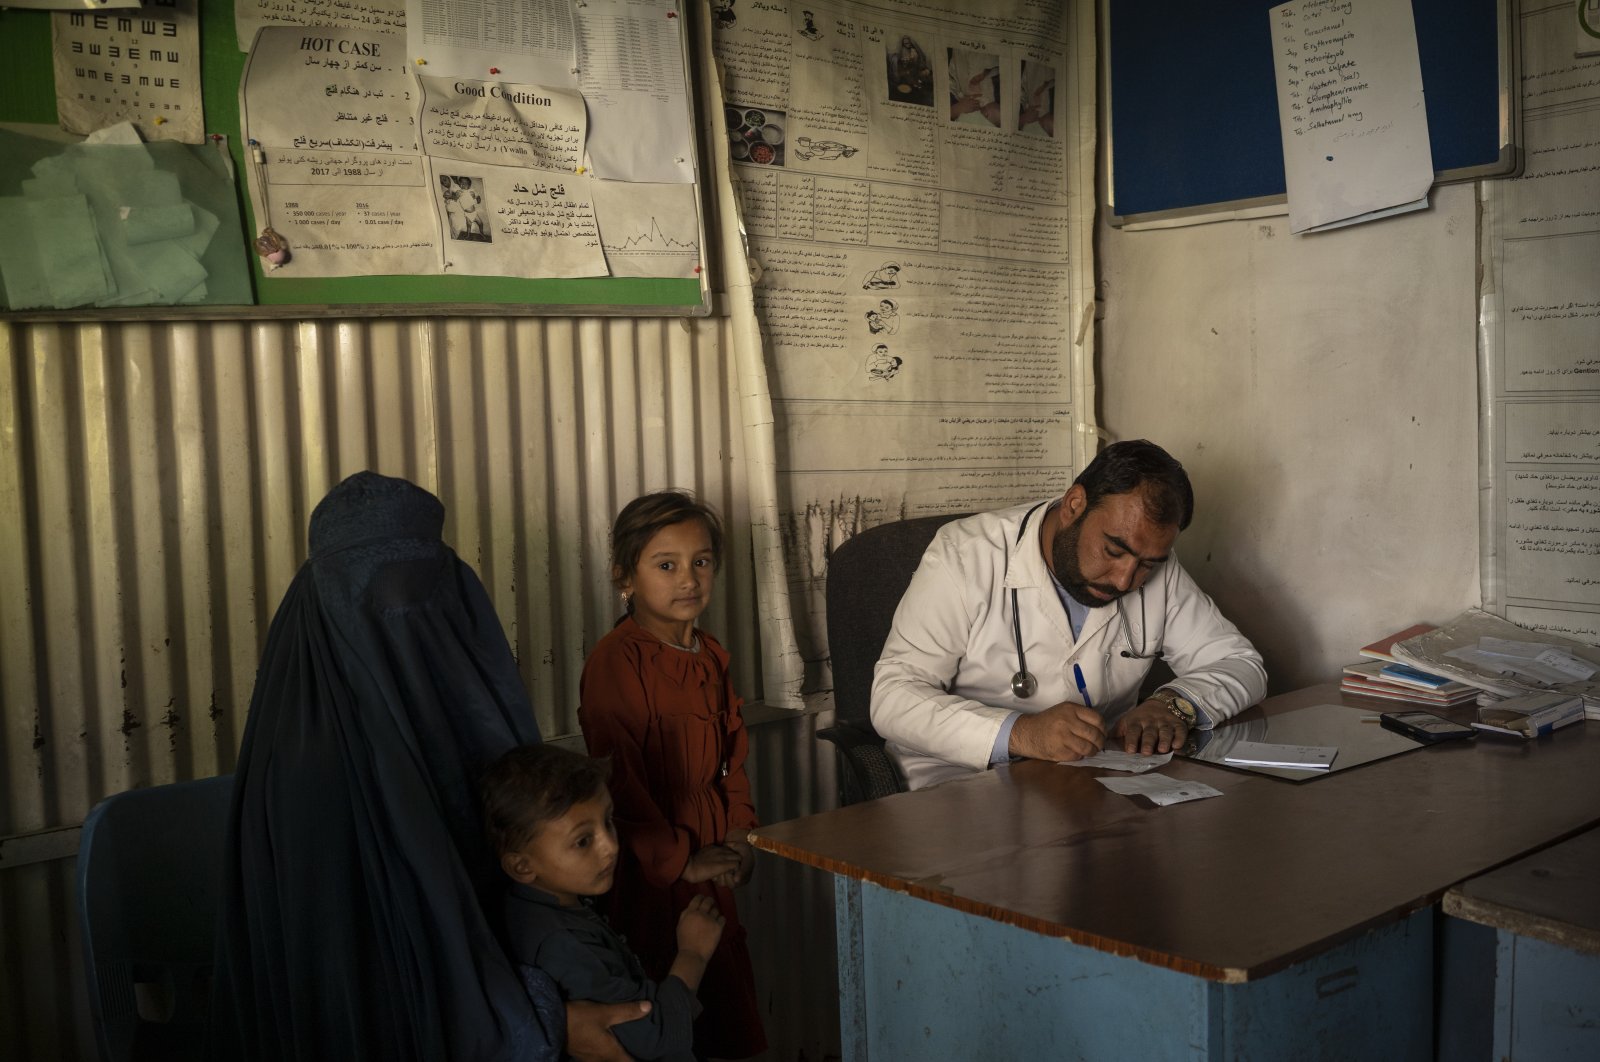 Dr. Gul Nazar writes a prescription for patients in the Mirbacha Kot hospital in Afghanistan, Oct. 25, 2021. (AP Photo)